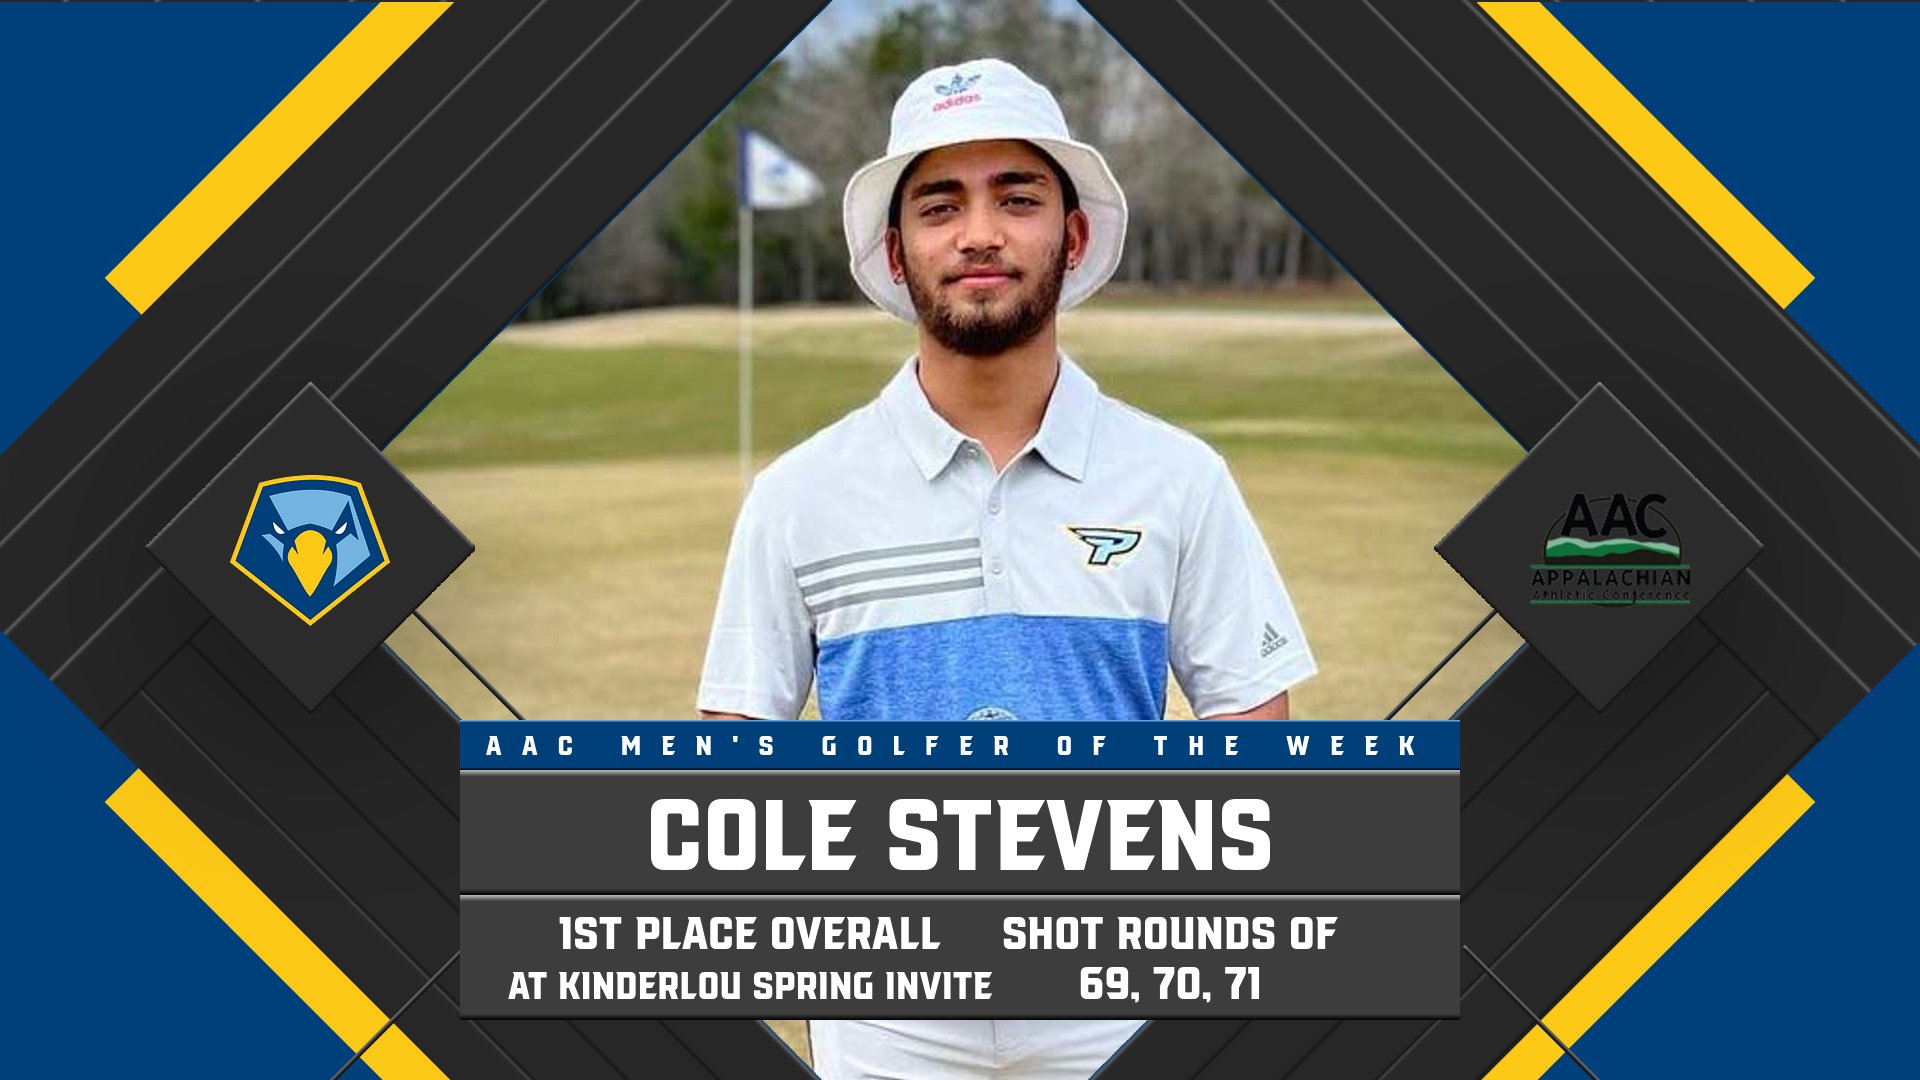 Cole Stevens’ big return to the course earns him AAC Golfer of the Week